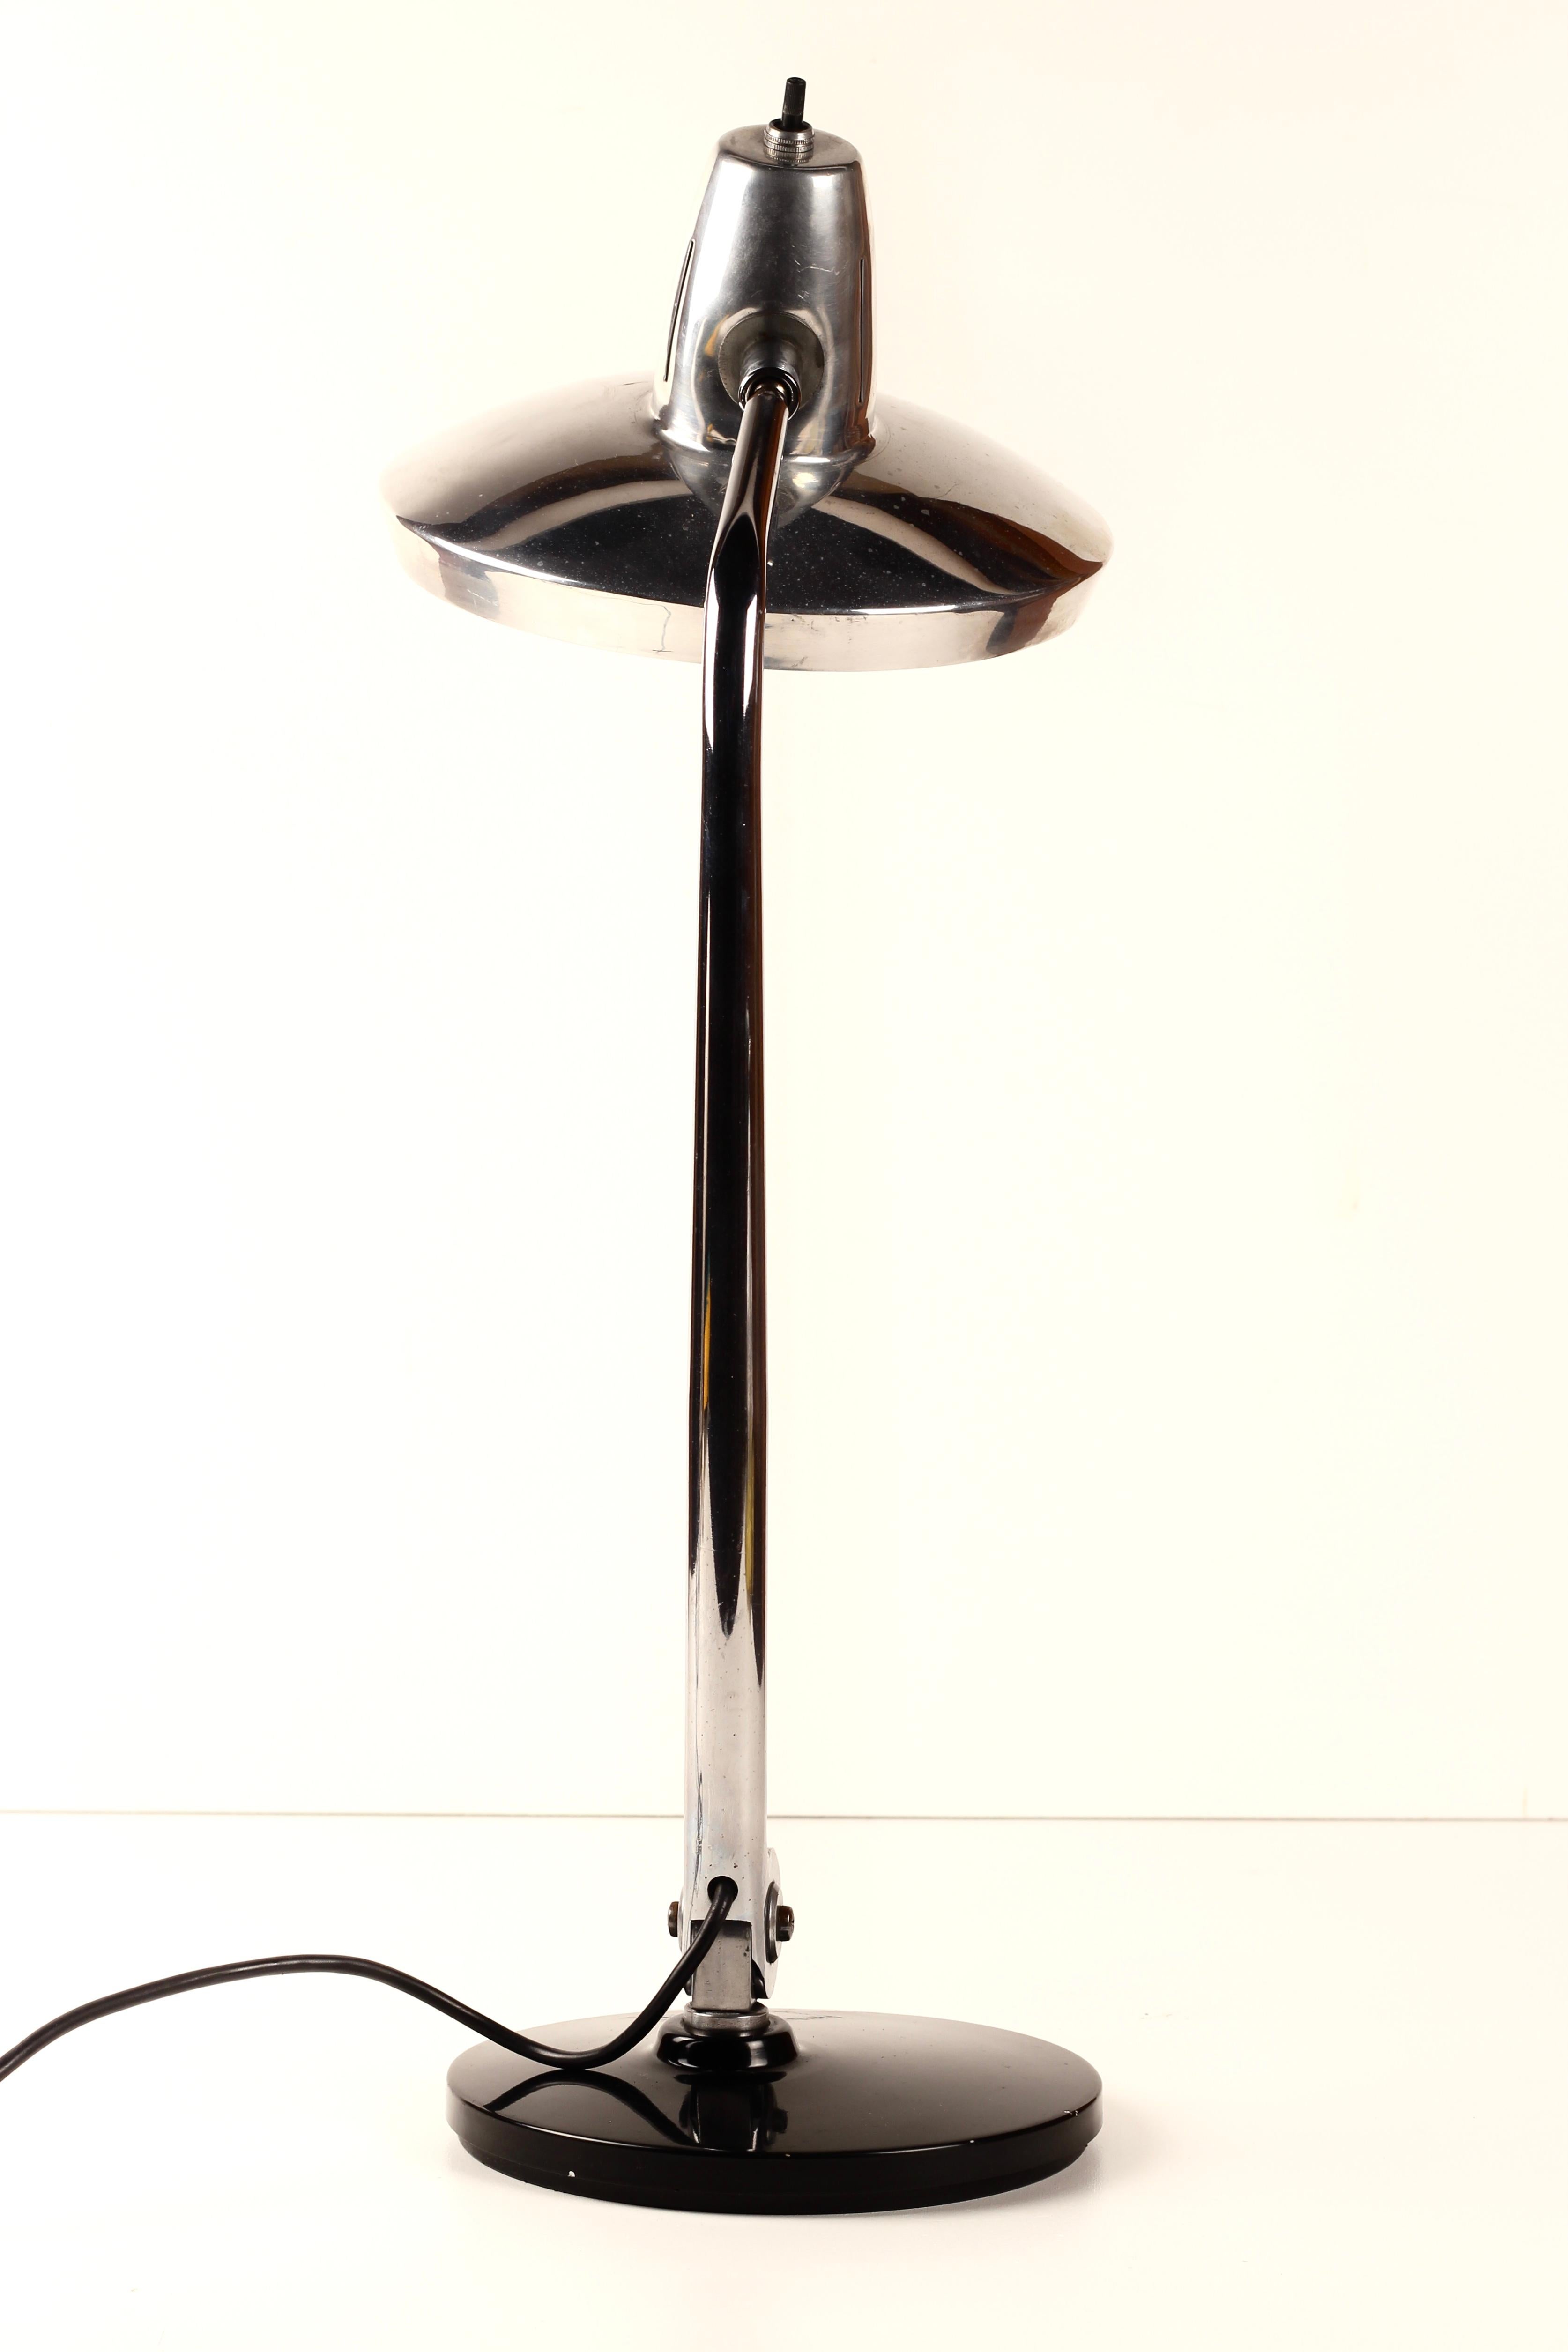 Chrome and Aluminium Fase desk lamp Modelos patentados Madrid Espana In Good Condition For Sale In London, GB